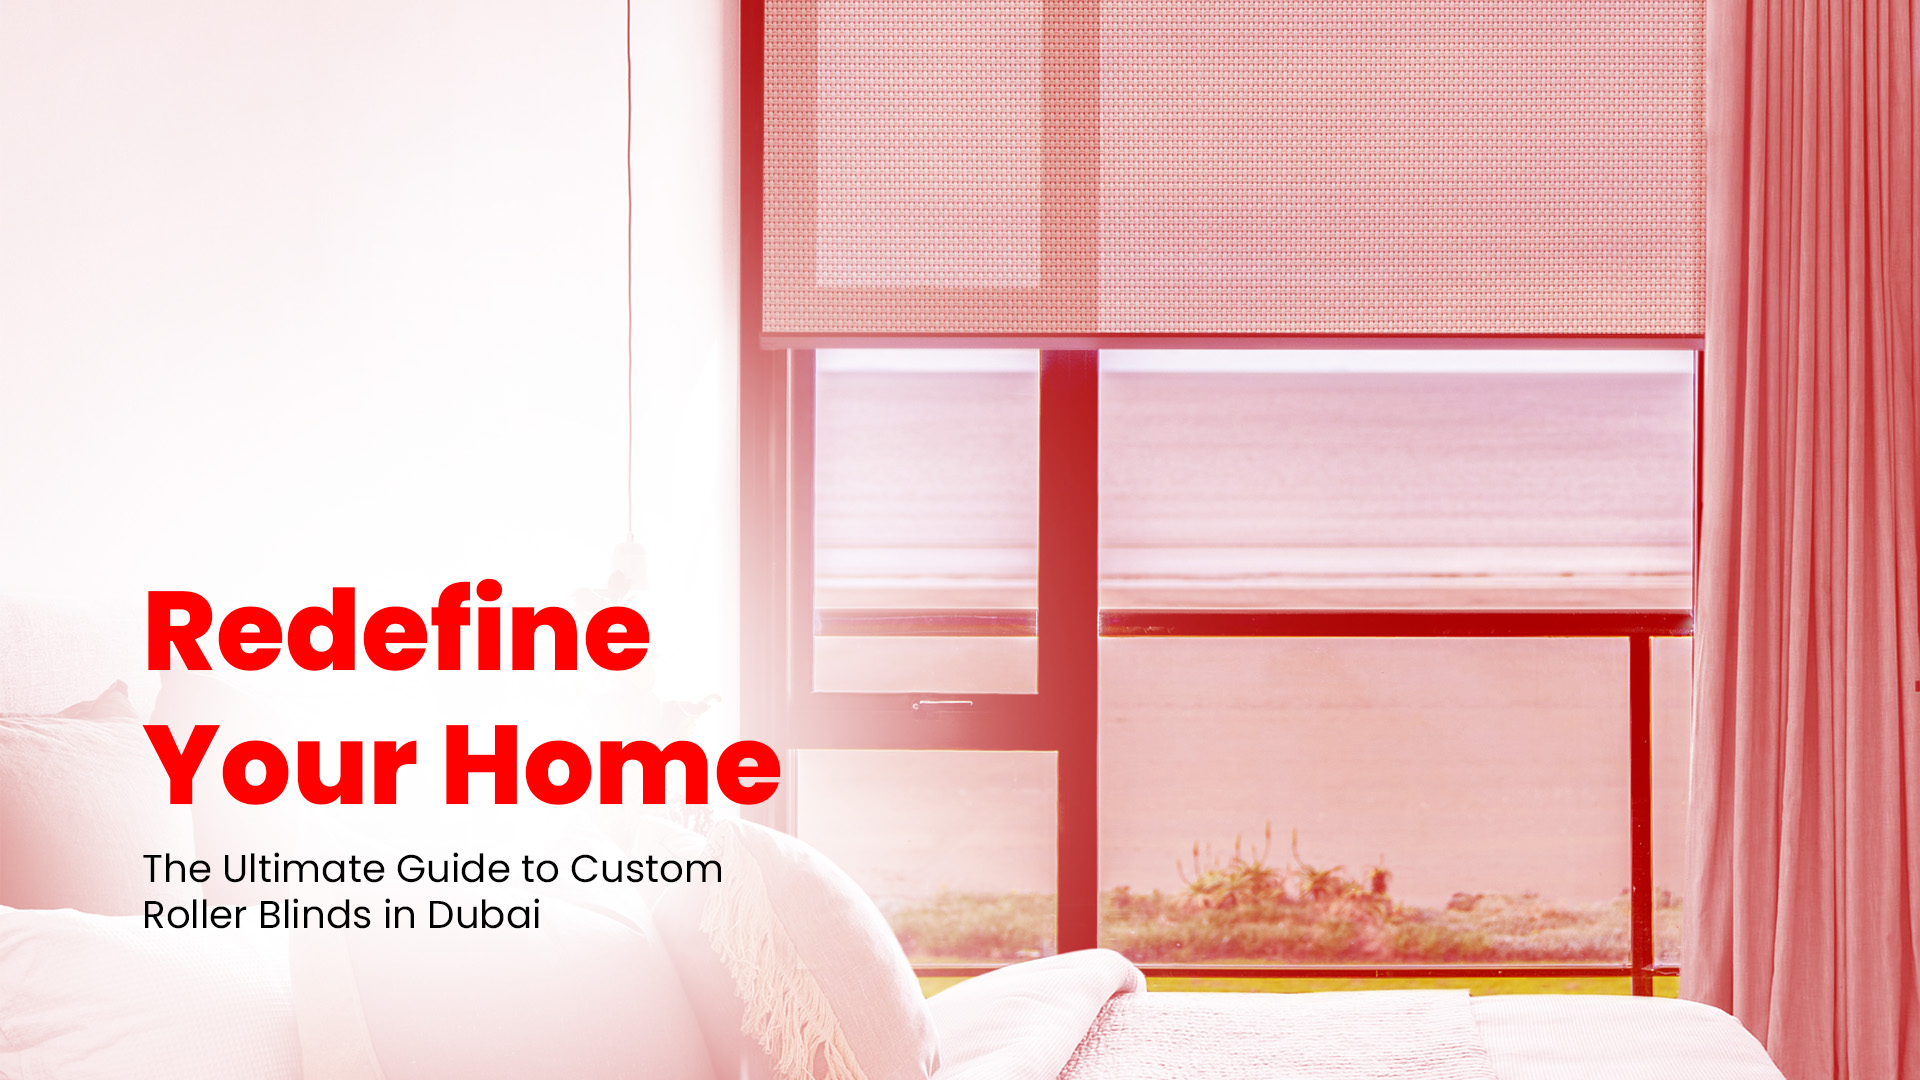 Redefine Your Home: The Ultimate Guide to Custom Roller Blinds in Dubai